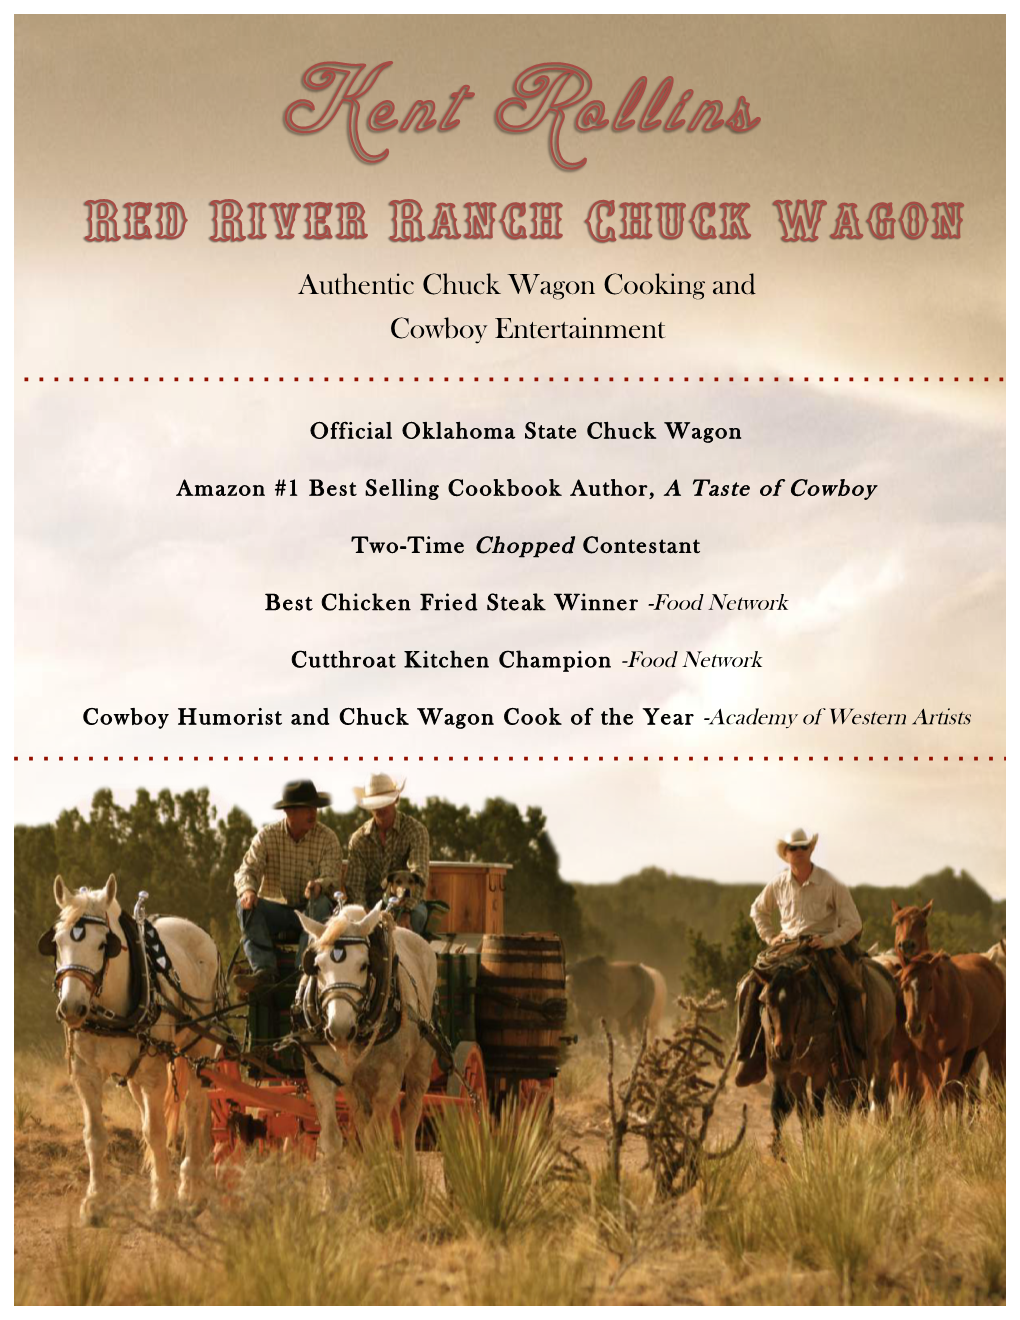 Authentic Chuck Wagon Cooking and Cowboy Entertainment